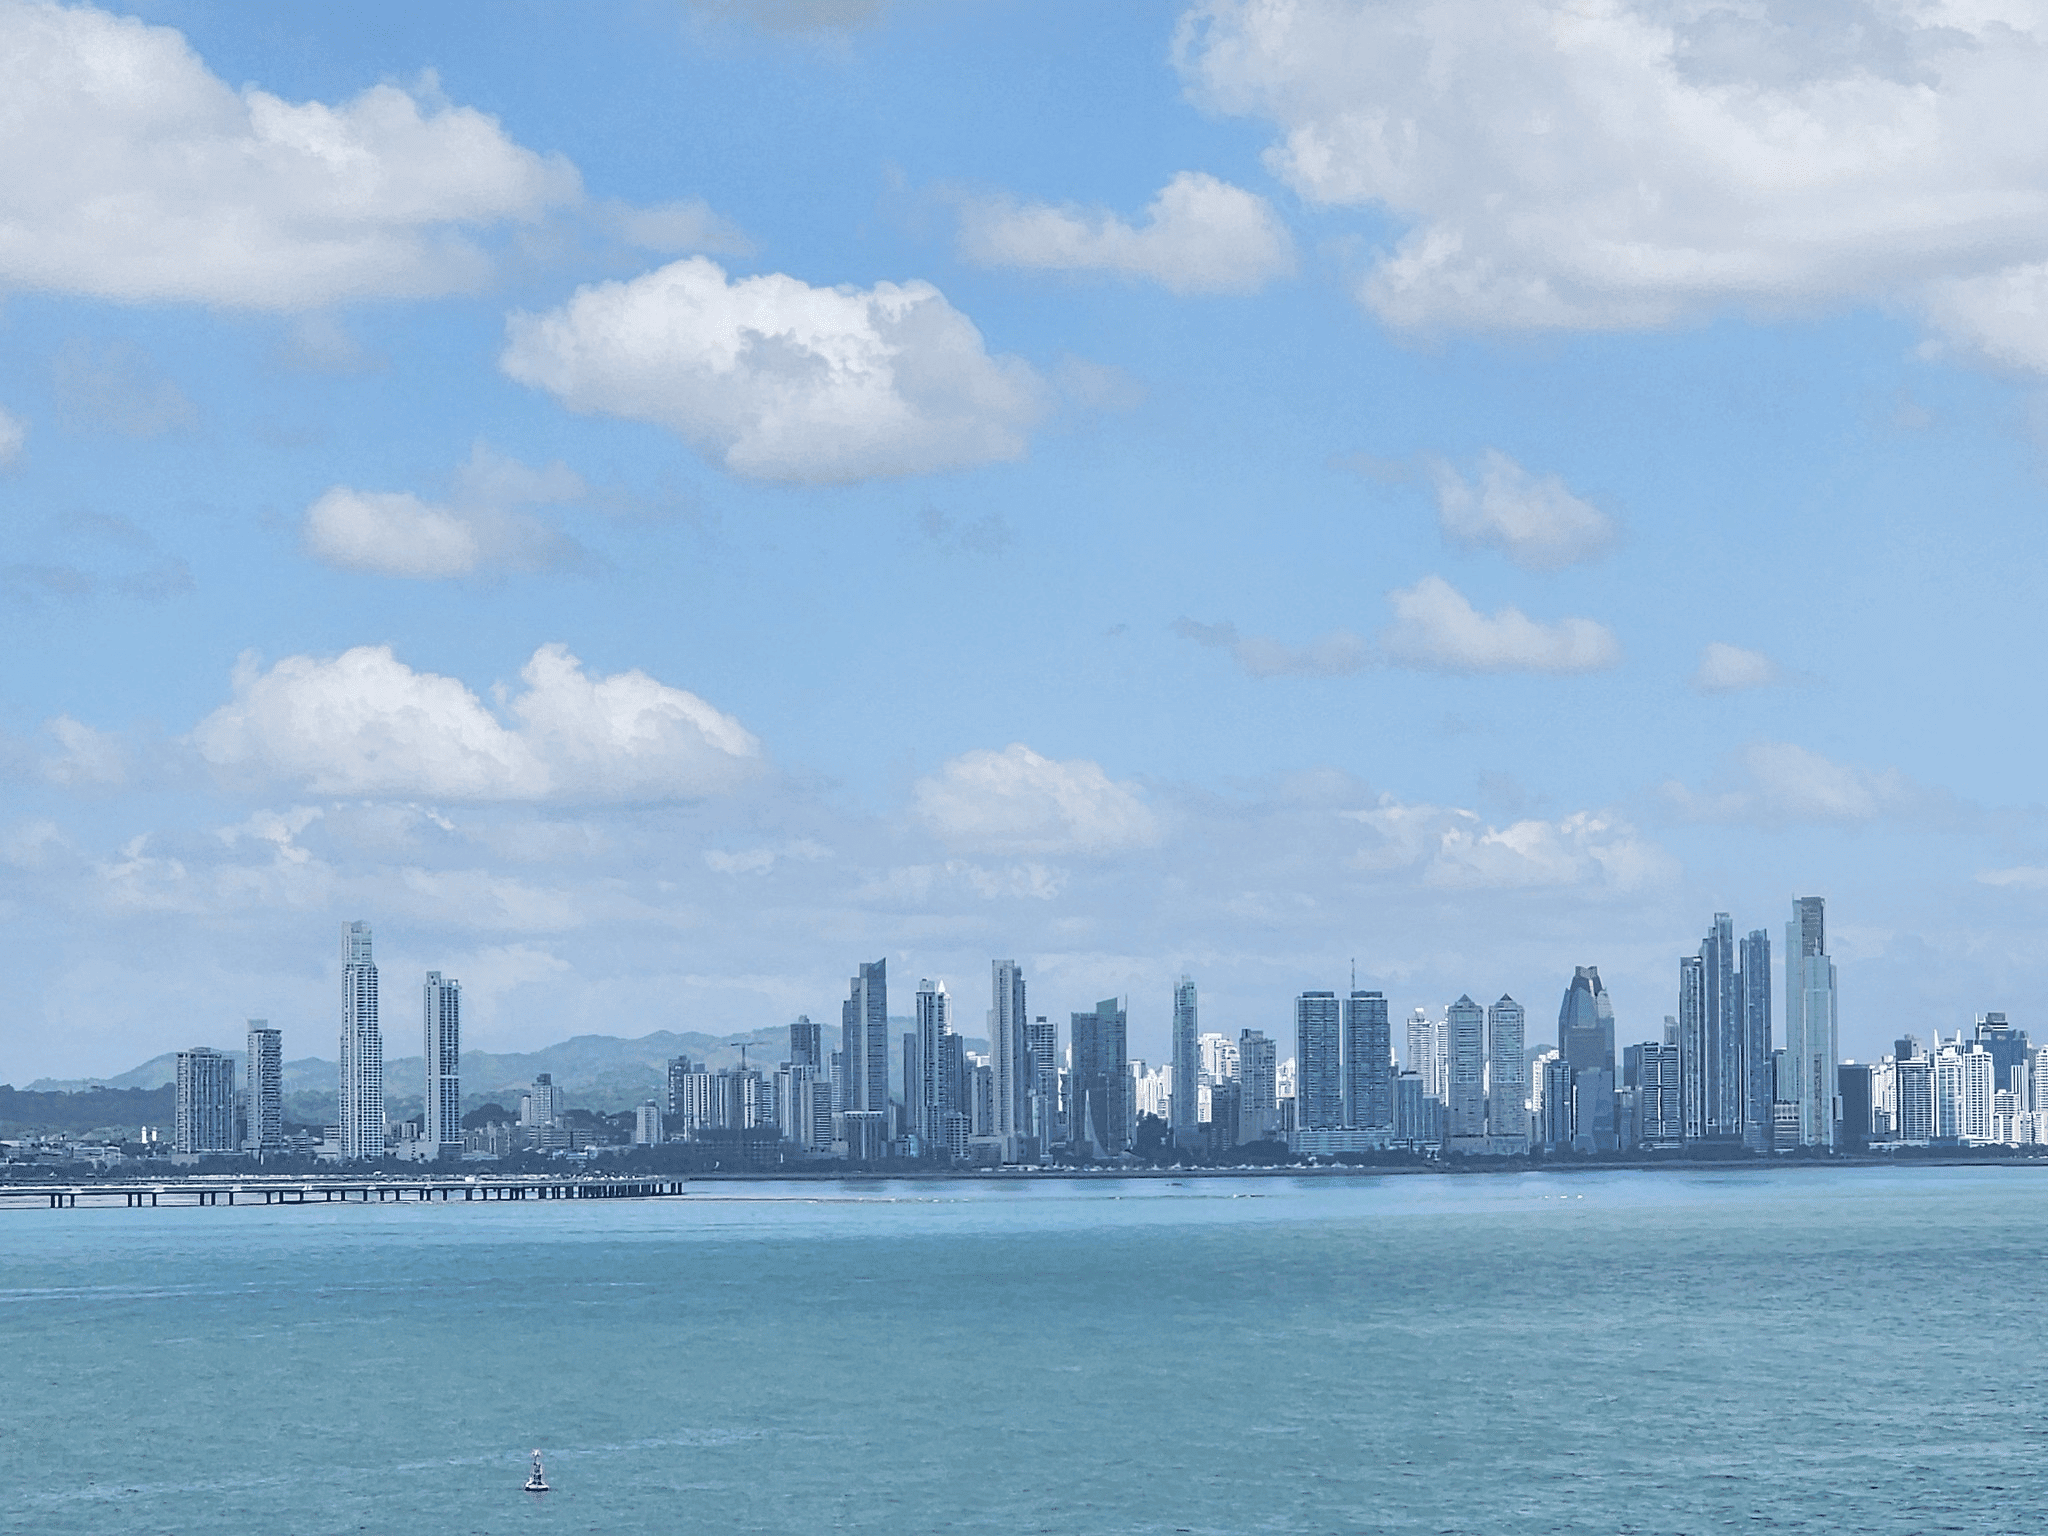 The skyline of Panama City by day.